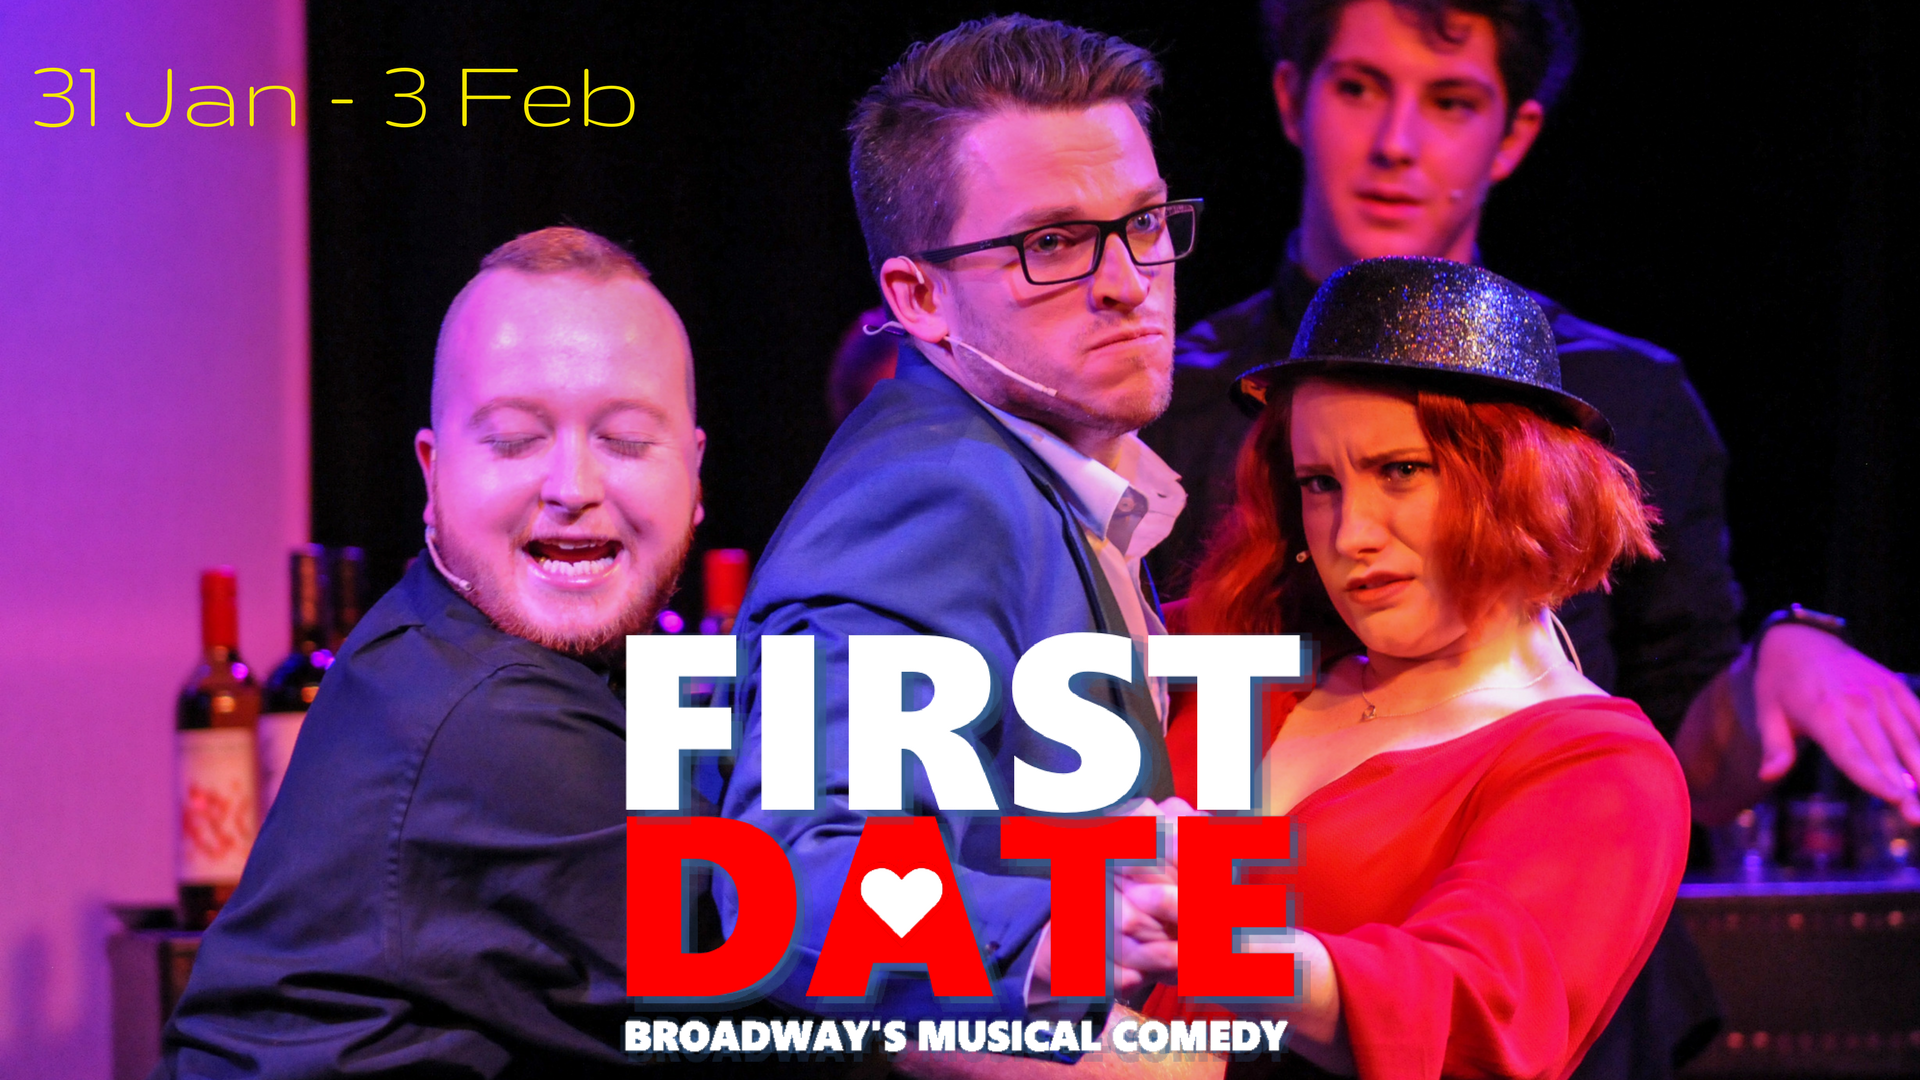 First Date the musical